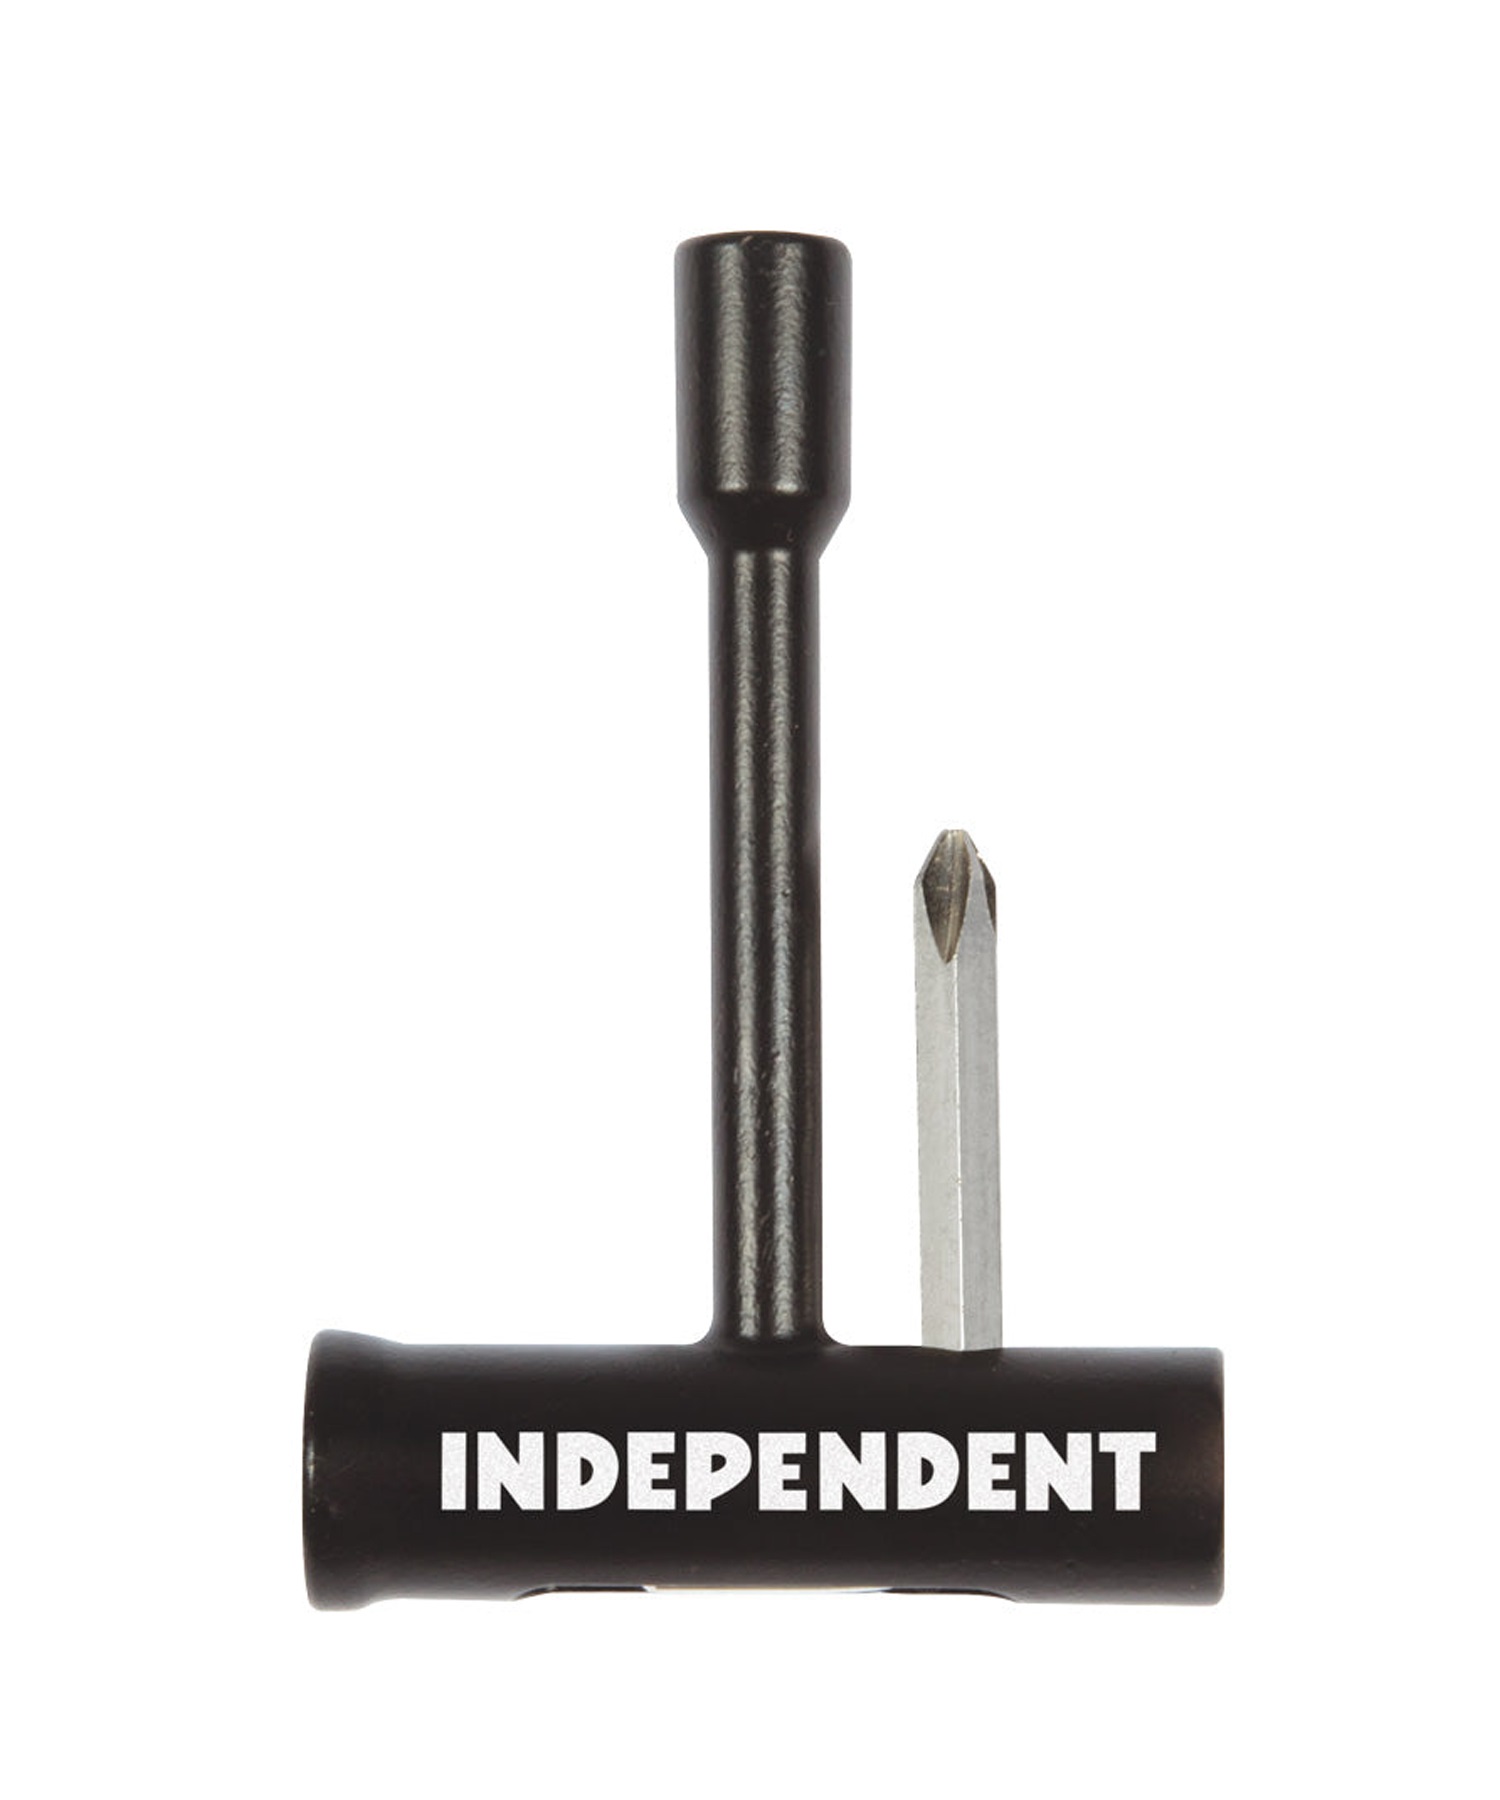 INDEPENDENT インディペンデント スケートボード ツール T-TOOL 35011902(ONECOLOR-ONESIZE)